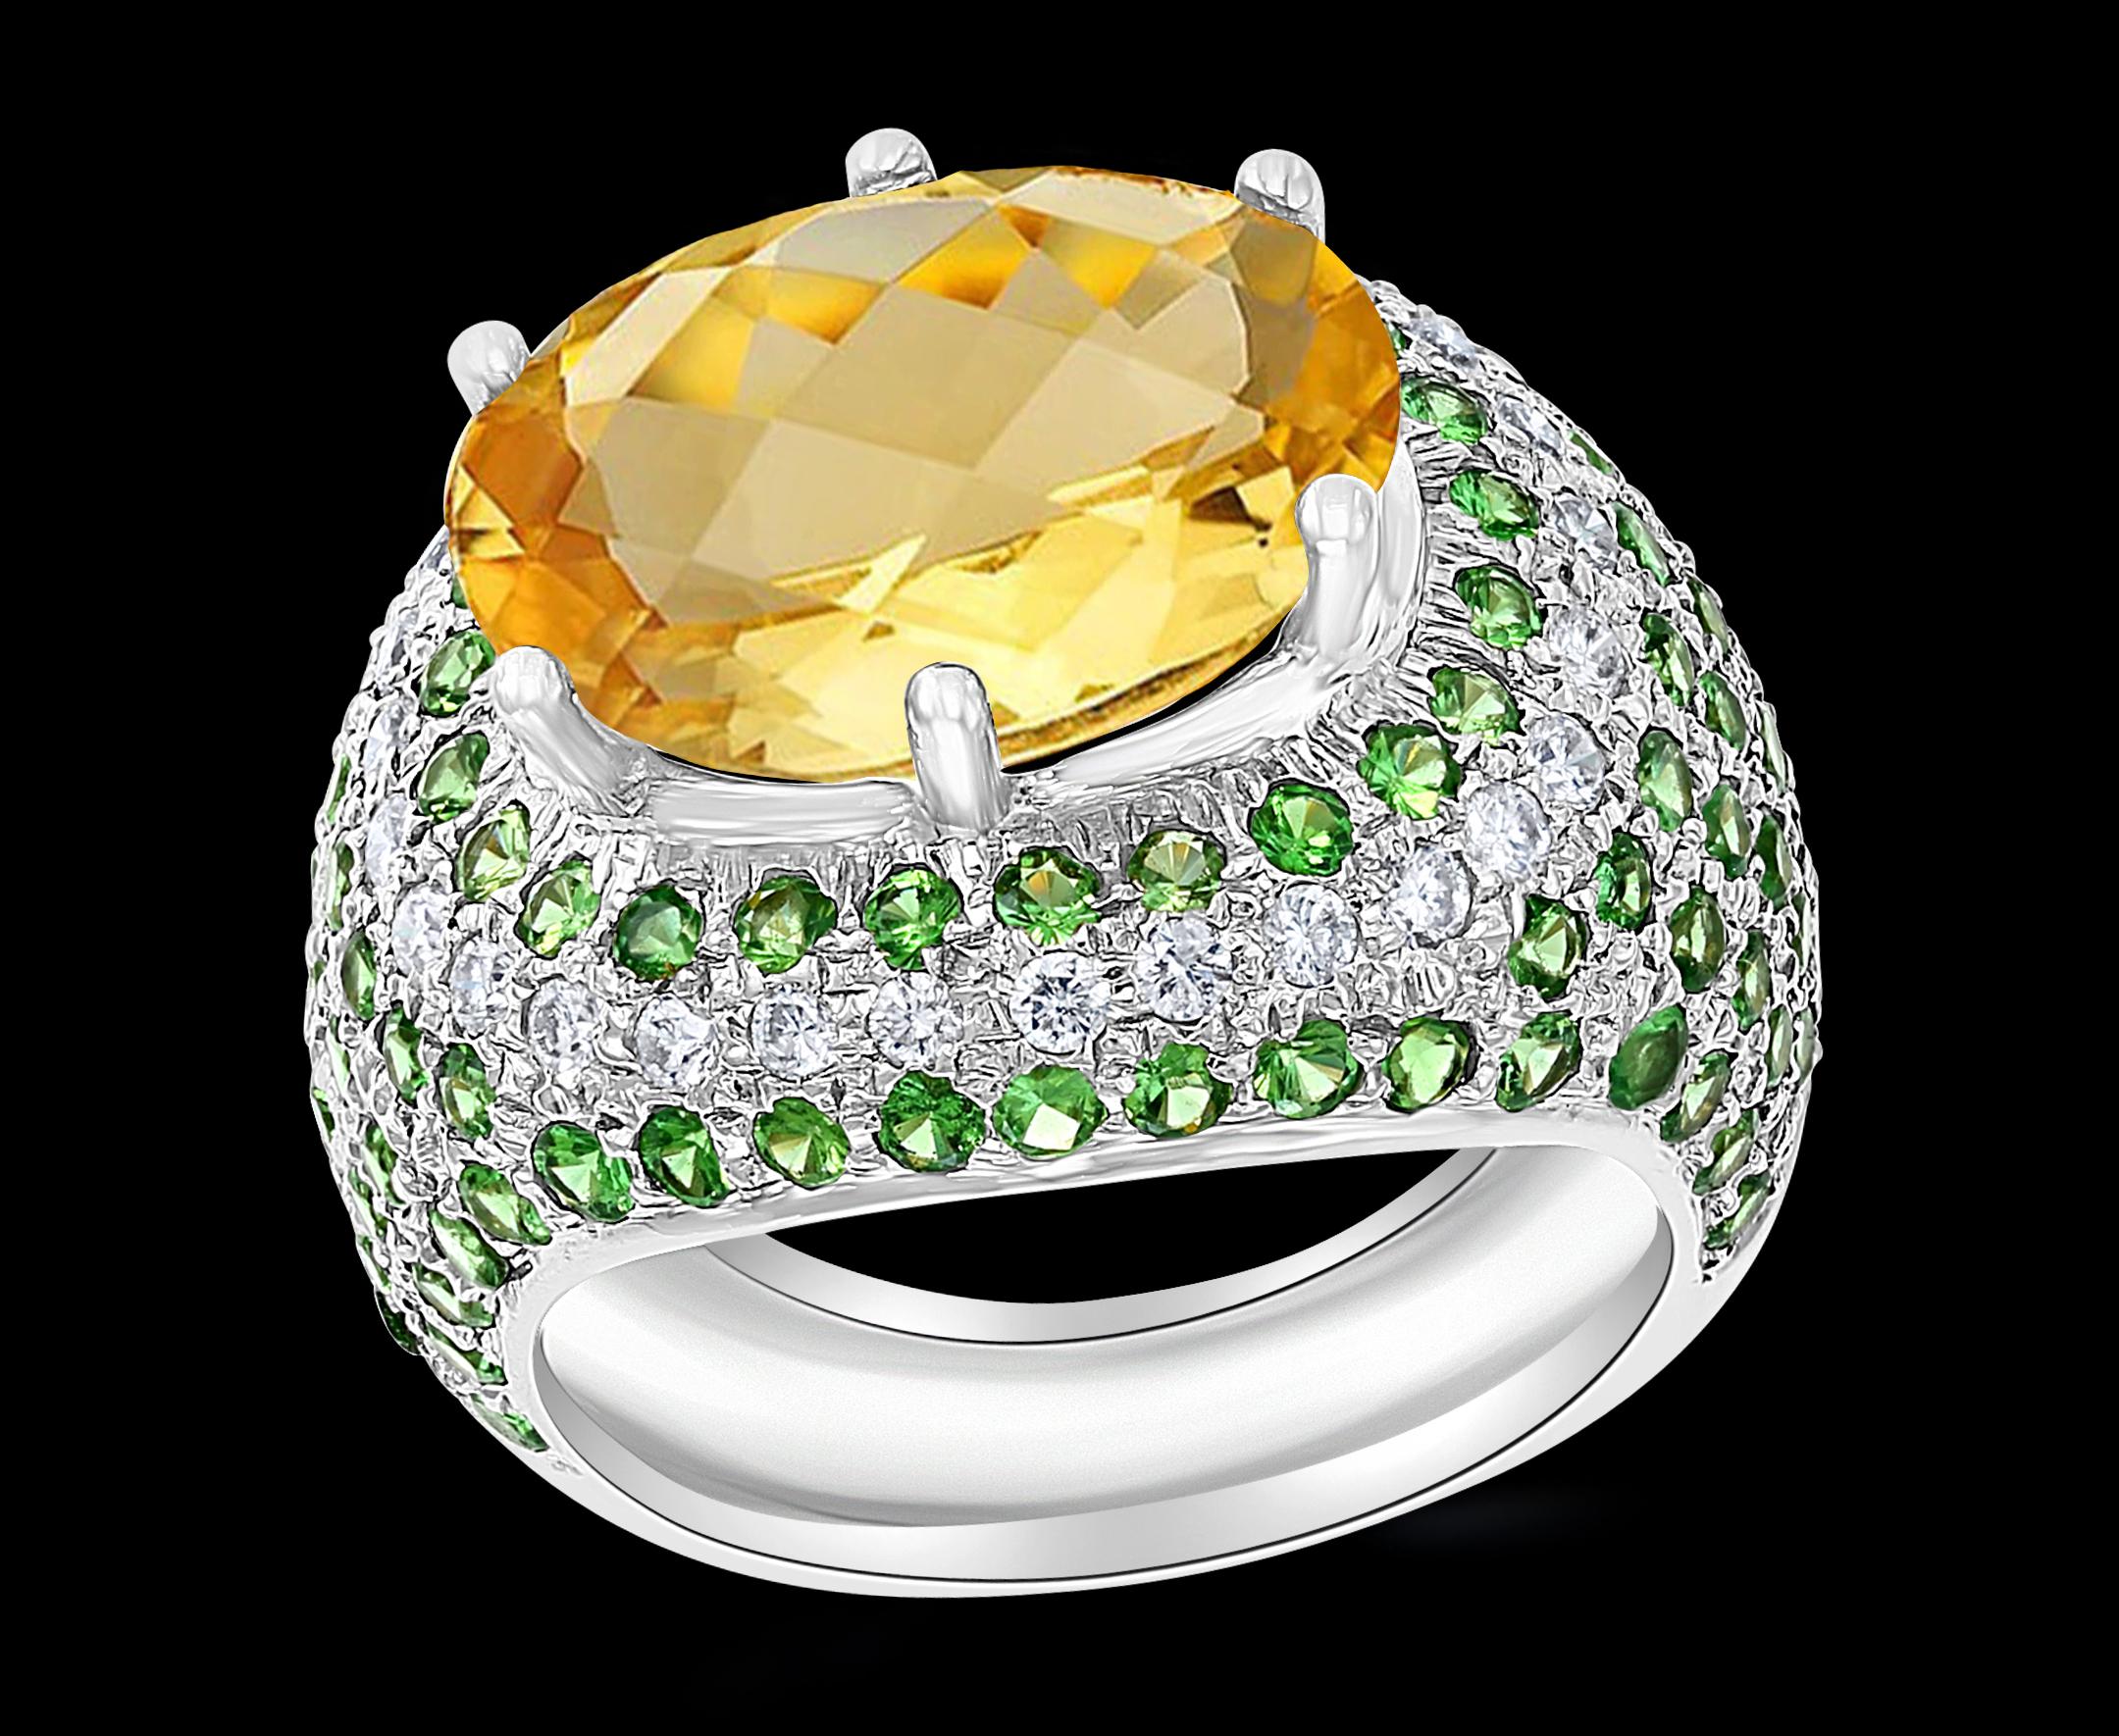 Approximately 7 Carat Oval Citrine Tsavorite And Diamond Ring In 18 Karat White Gold , Estate
This is a ring which has a  approximately 7 carat of high quality Citrine  , the main stone is surrounded by brilliant cut diamonds and round